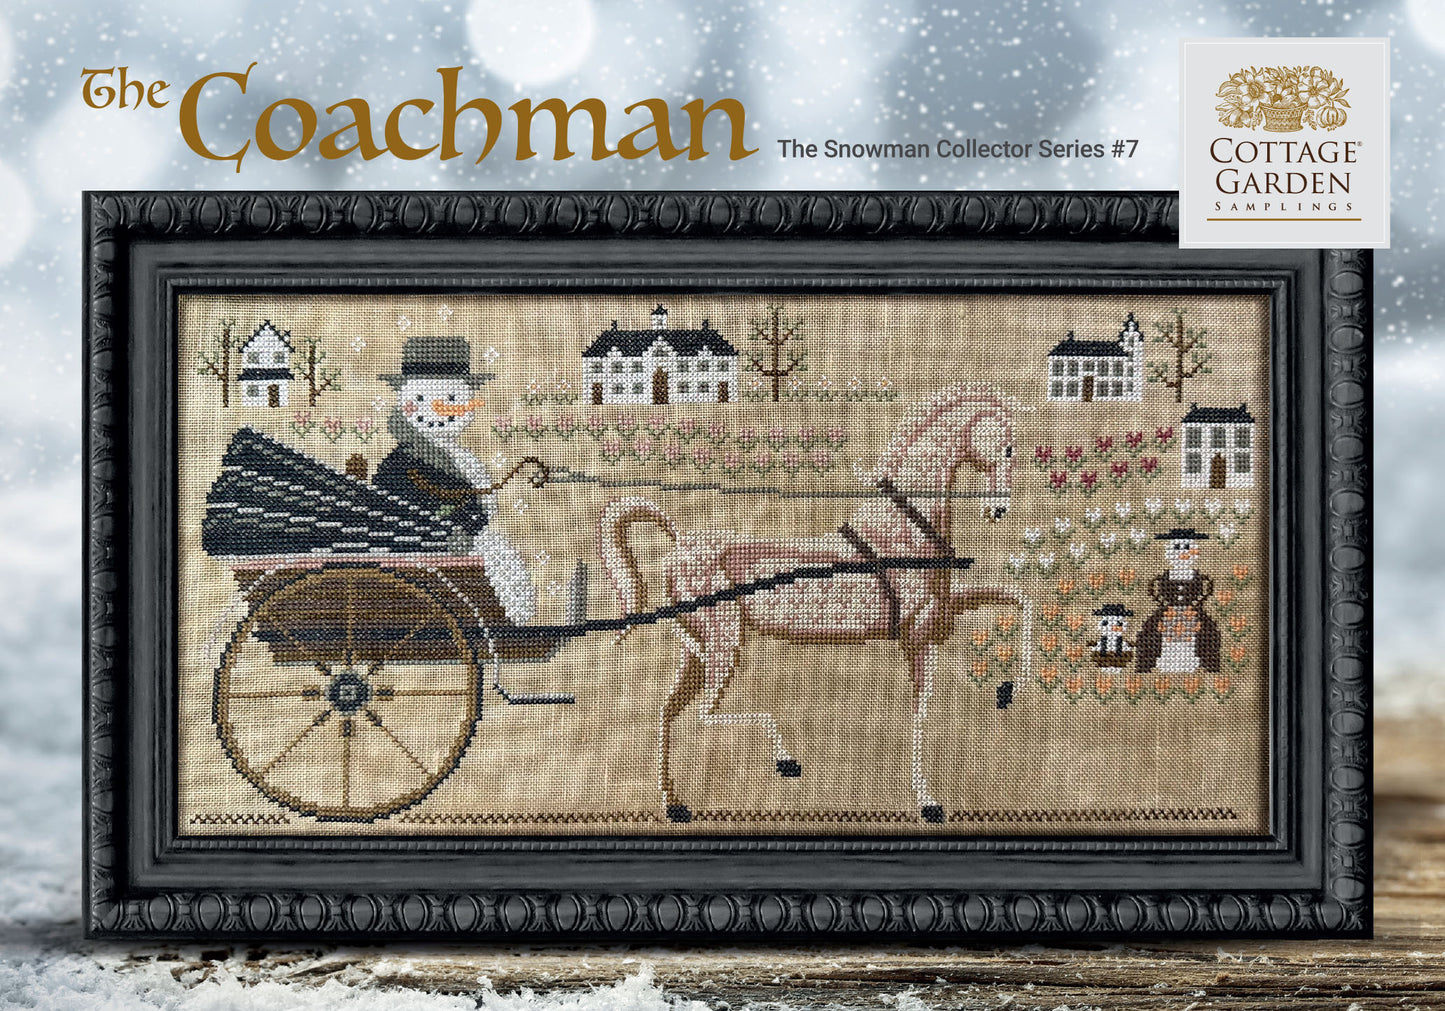 The Coachman by Cottage Garden Samplings